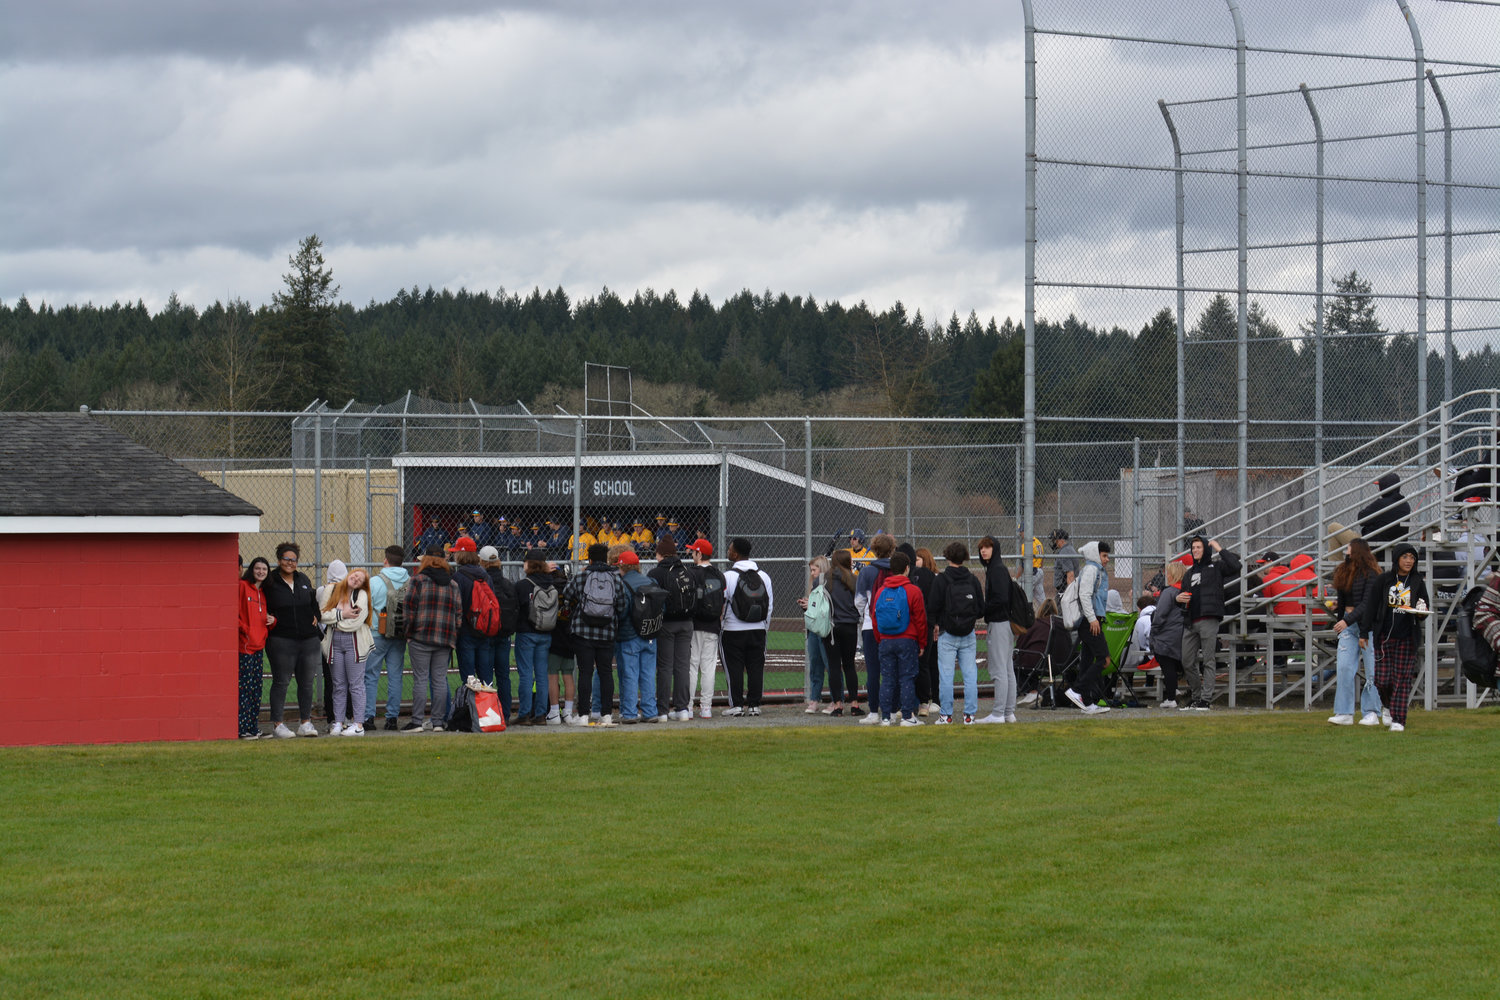 Yelm High School students look on as Saint Martin's University faces off against Montana State Billings on March 18 in Yelm.